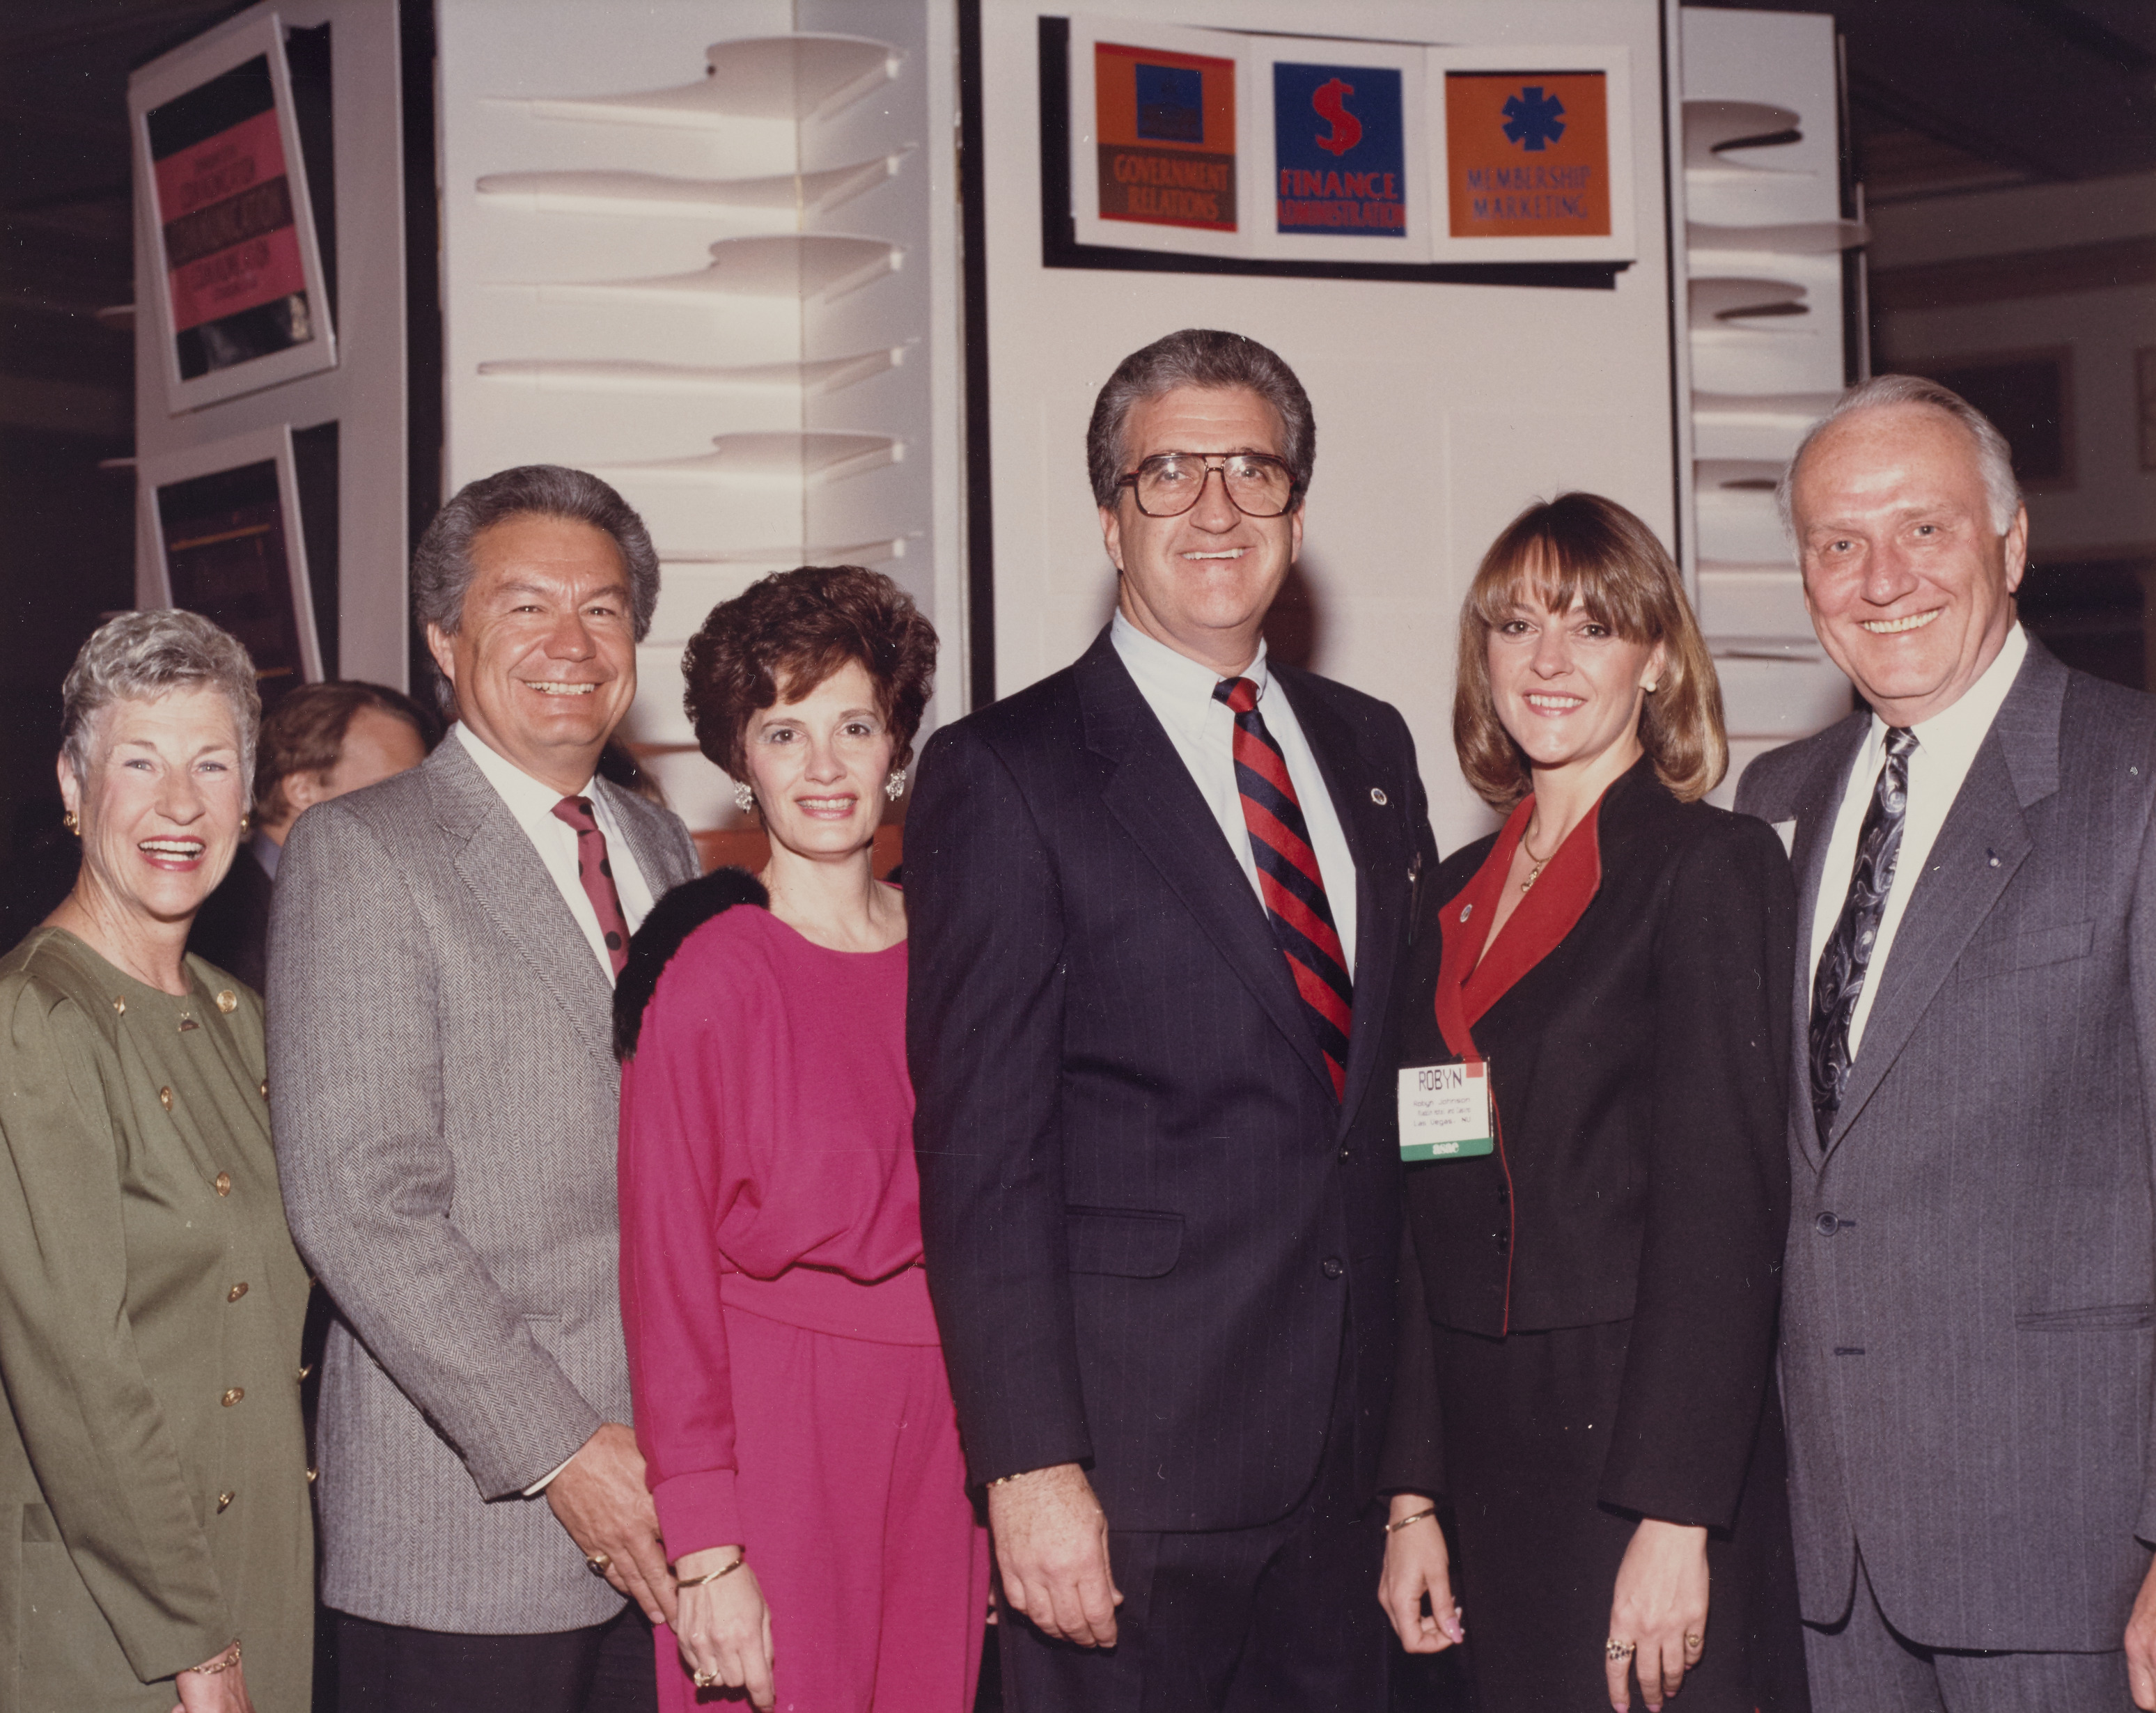 Photograph of Ron Lurie and others at ASAE Convention, Washington, D.C., 1990